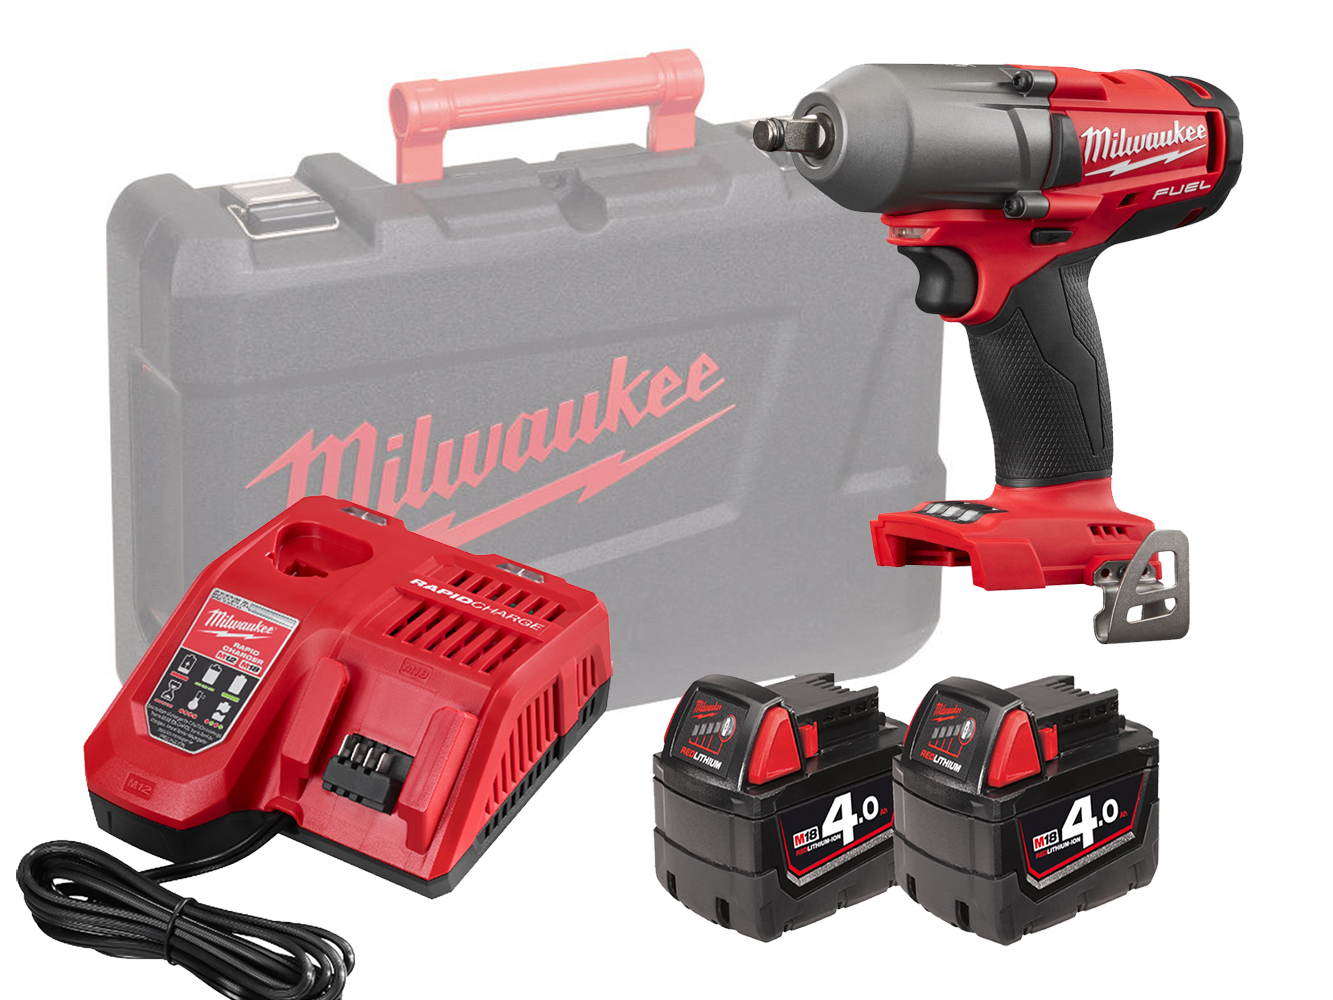 Milwaukee M18FMTIWF12 18V 1/2in Mid Torque Impact Wrench - 4.0Ah Pack